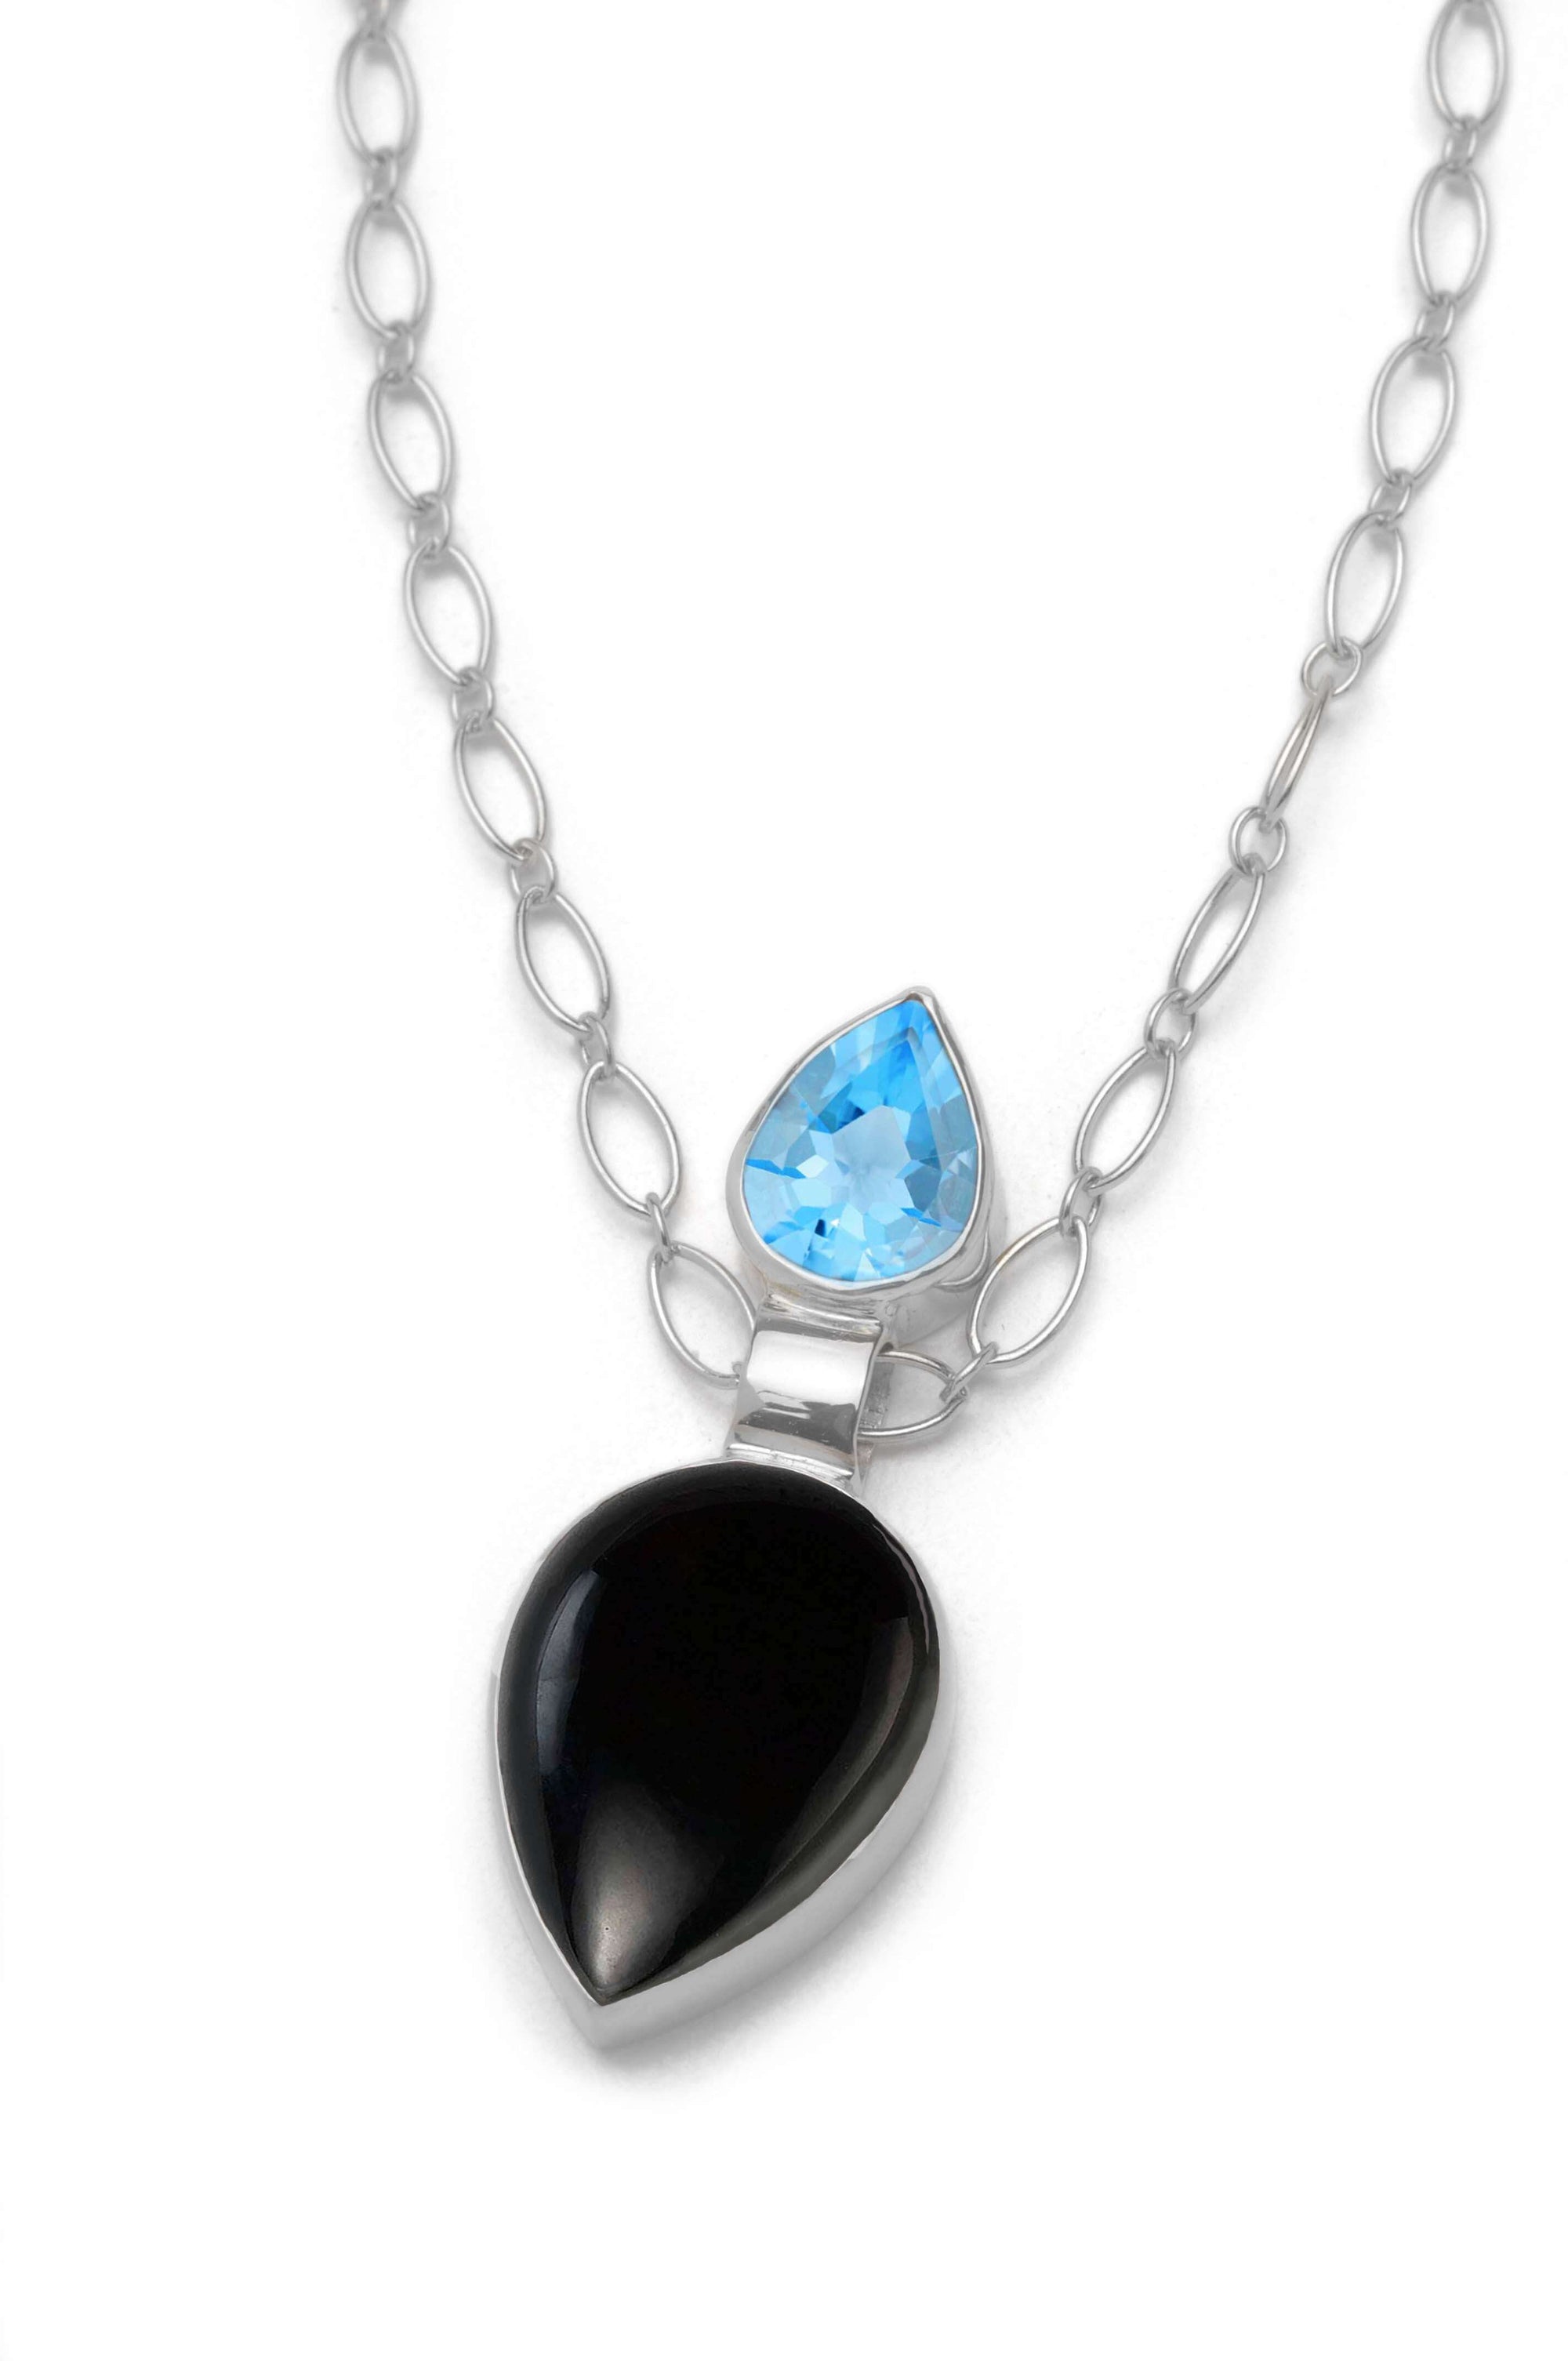 A black onyx necklace with Swiss blue topaz and sterling silver